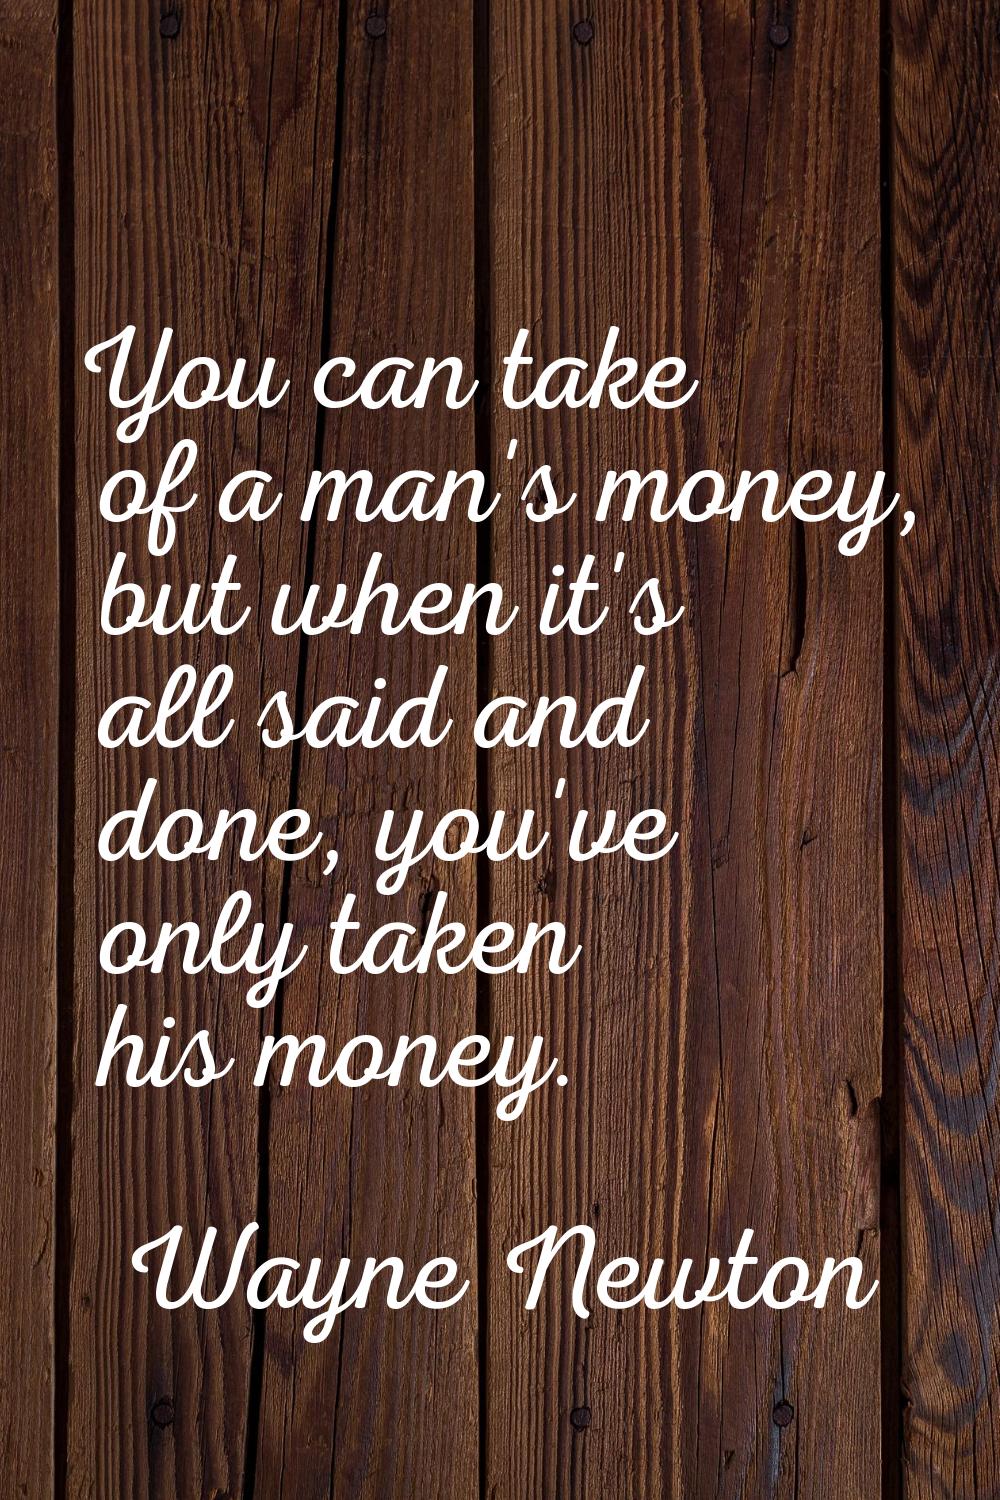 You can take of a man's money, but when it's all said and done, you've only taken his money.